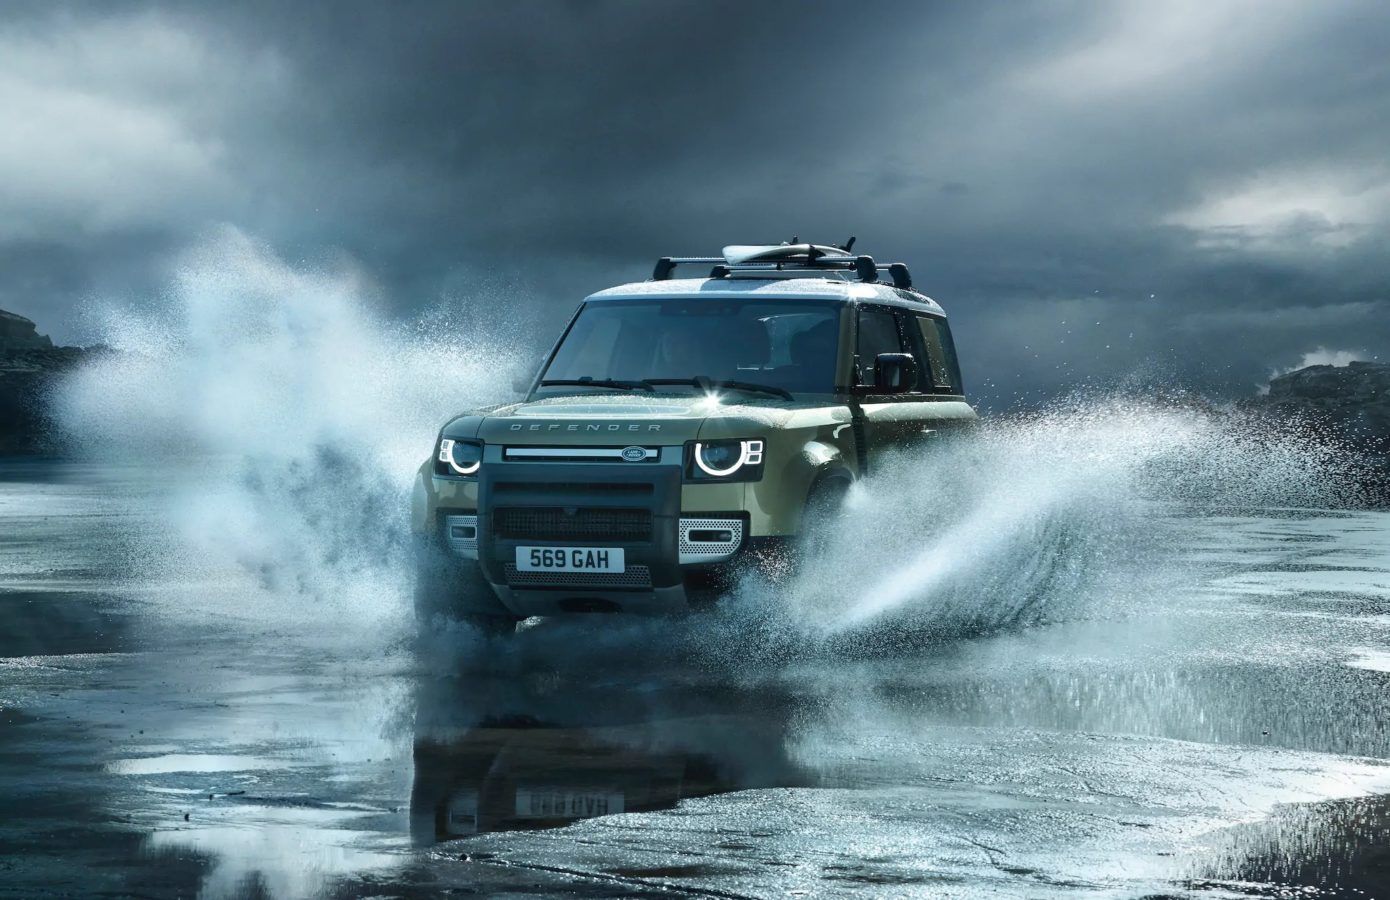 An exclusive first look inside the all-new Land Rover Defender